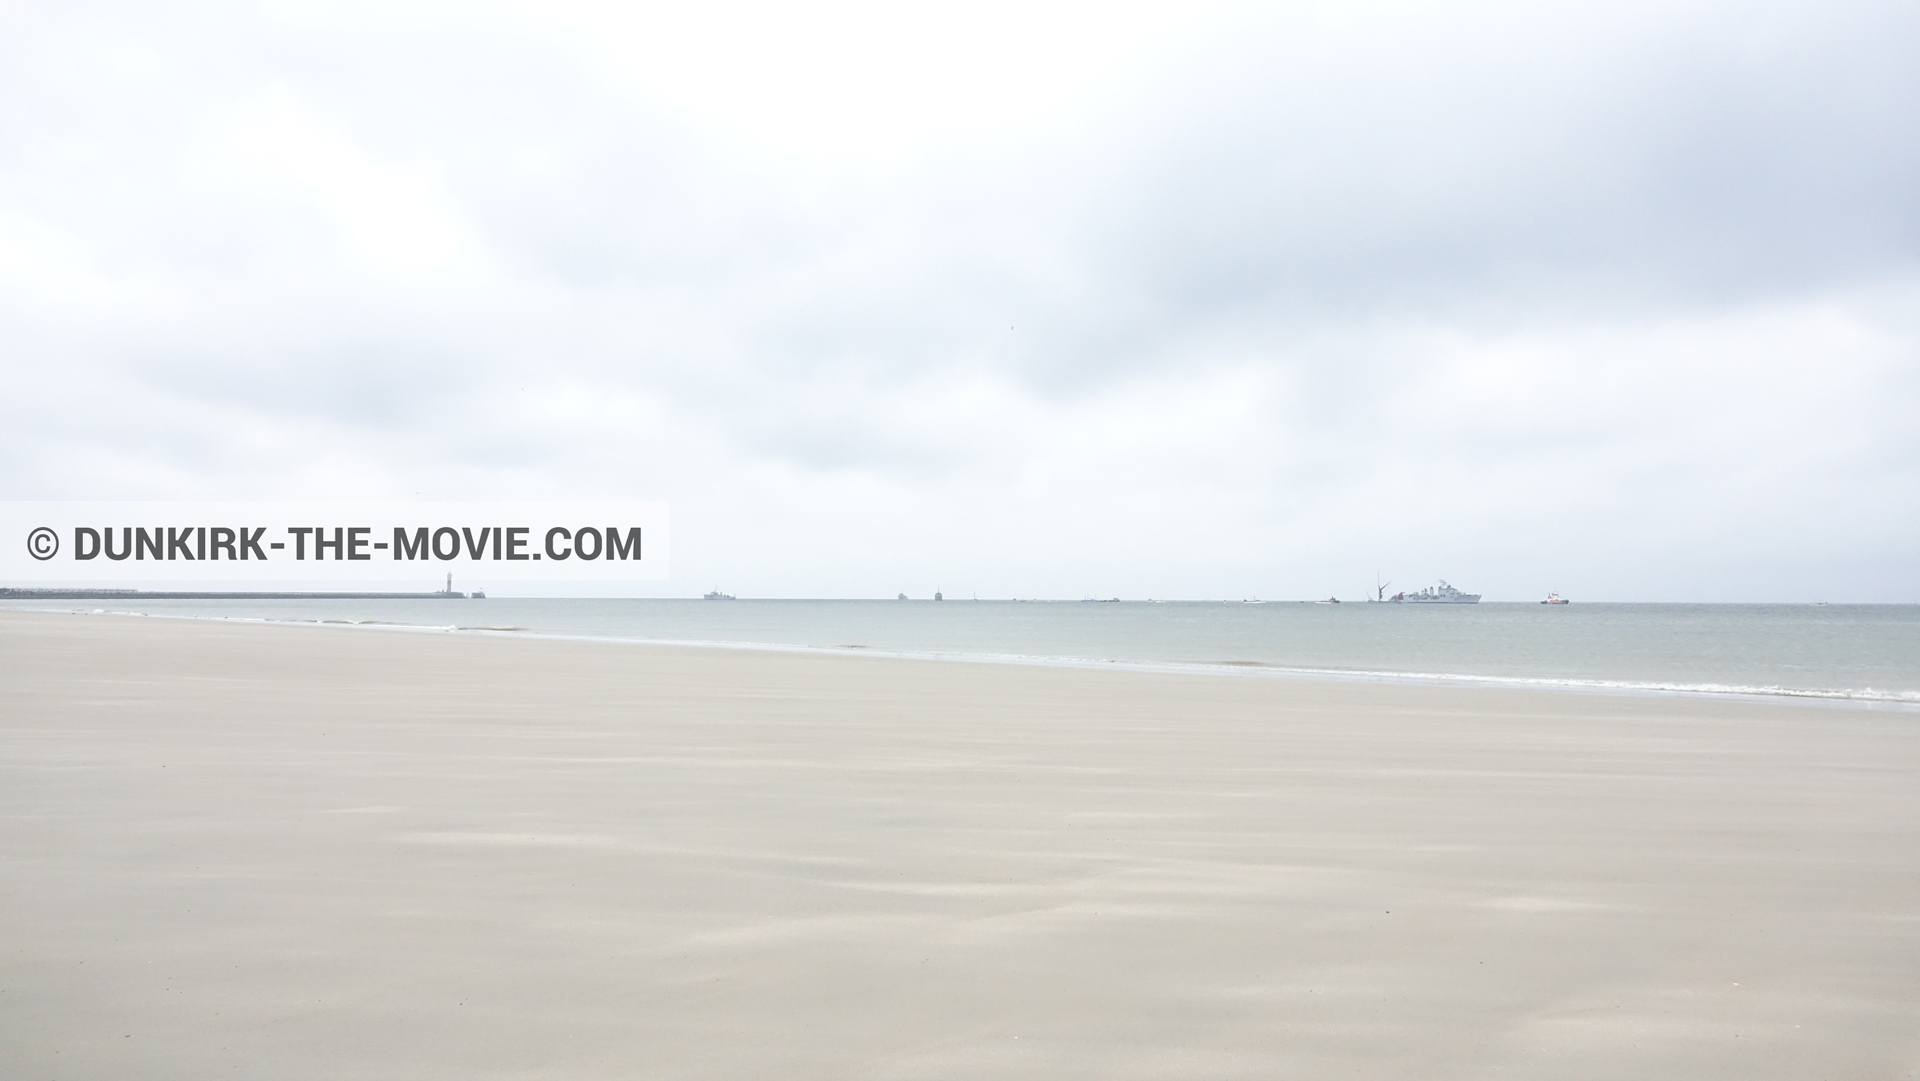 Picture with boat, cloudy sky, beach,  from behind the scene of the Dunkirk movie by Nolan